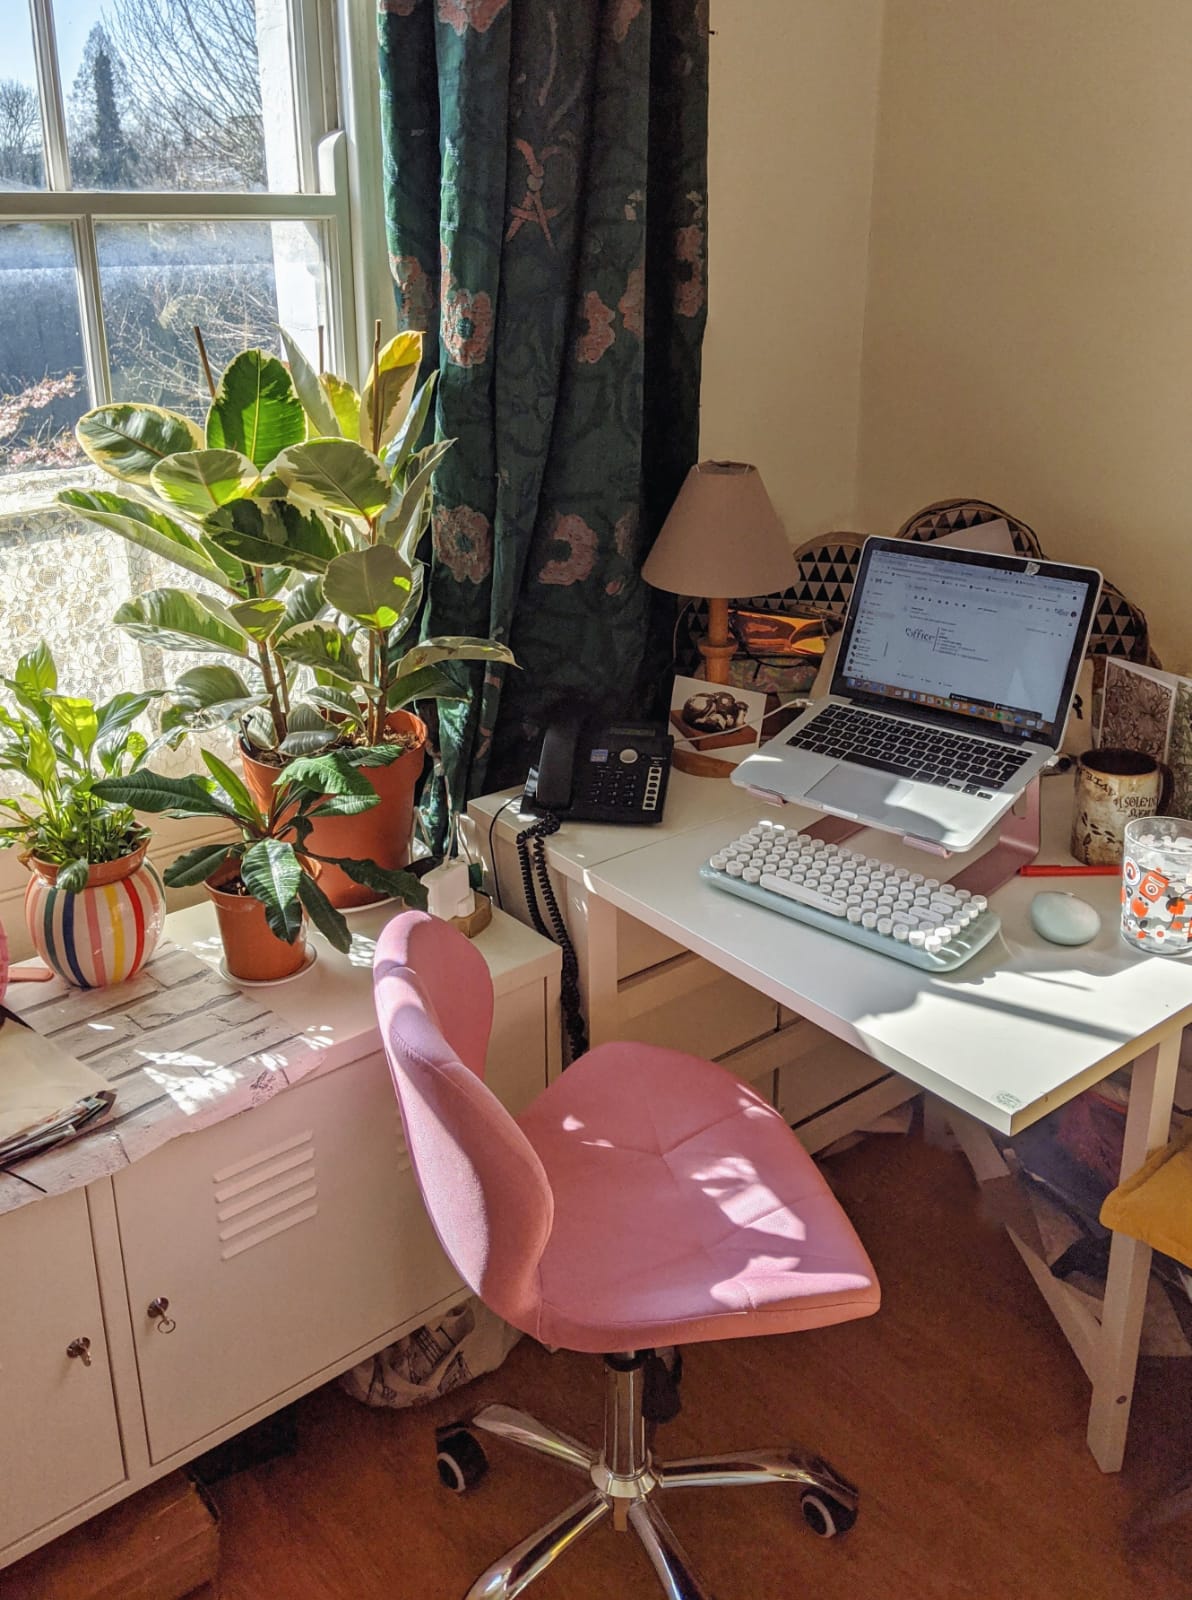 Five Important Questions to Ask About How Your Employees Work at Home